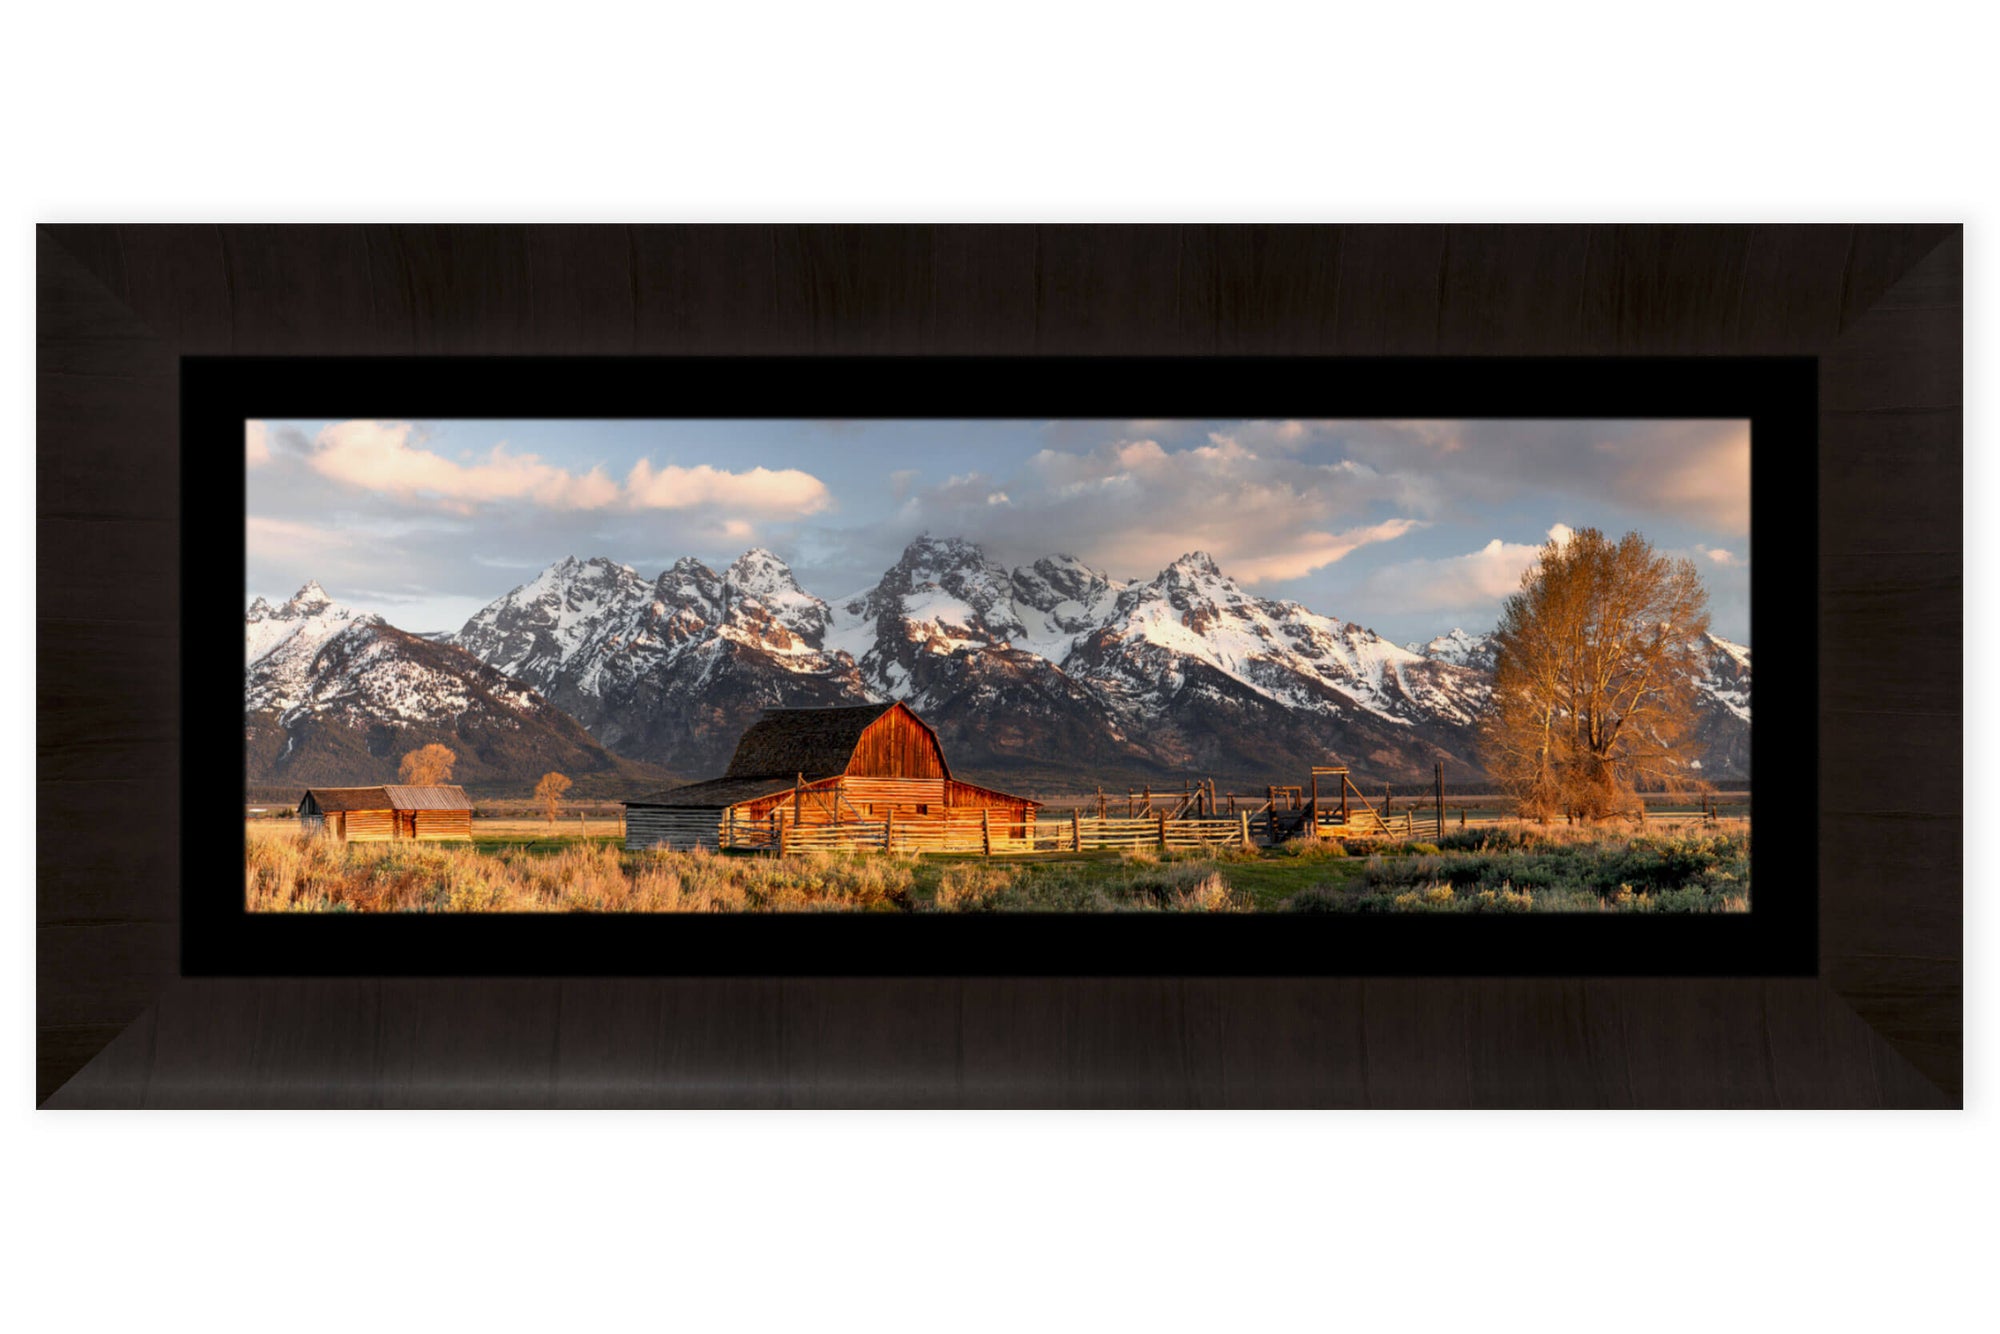 A piece of framed Jackson Hole art shows the barns at Mormon Row in Grand Teton National Park.